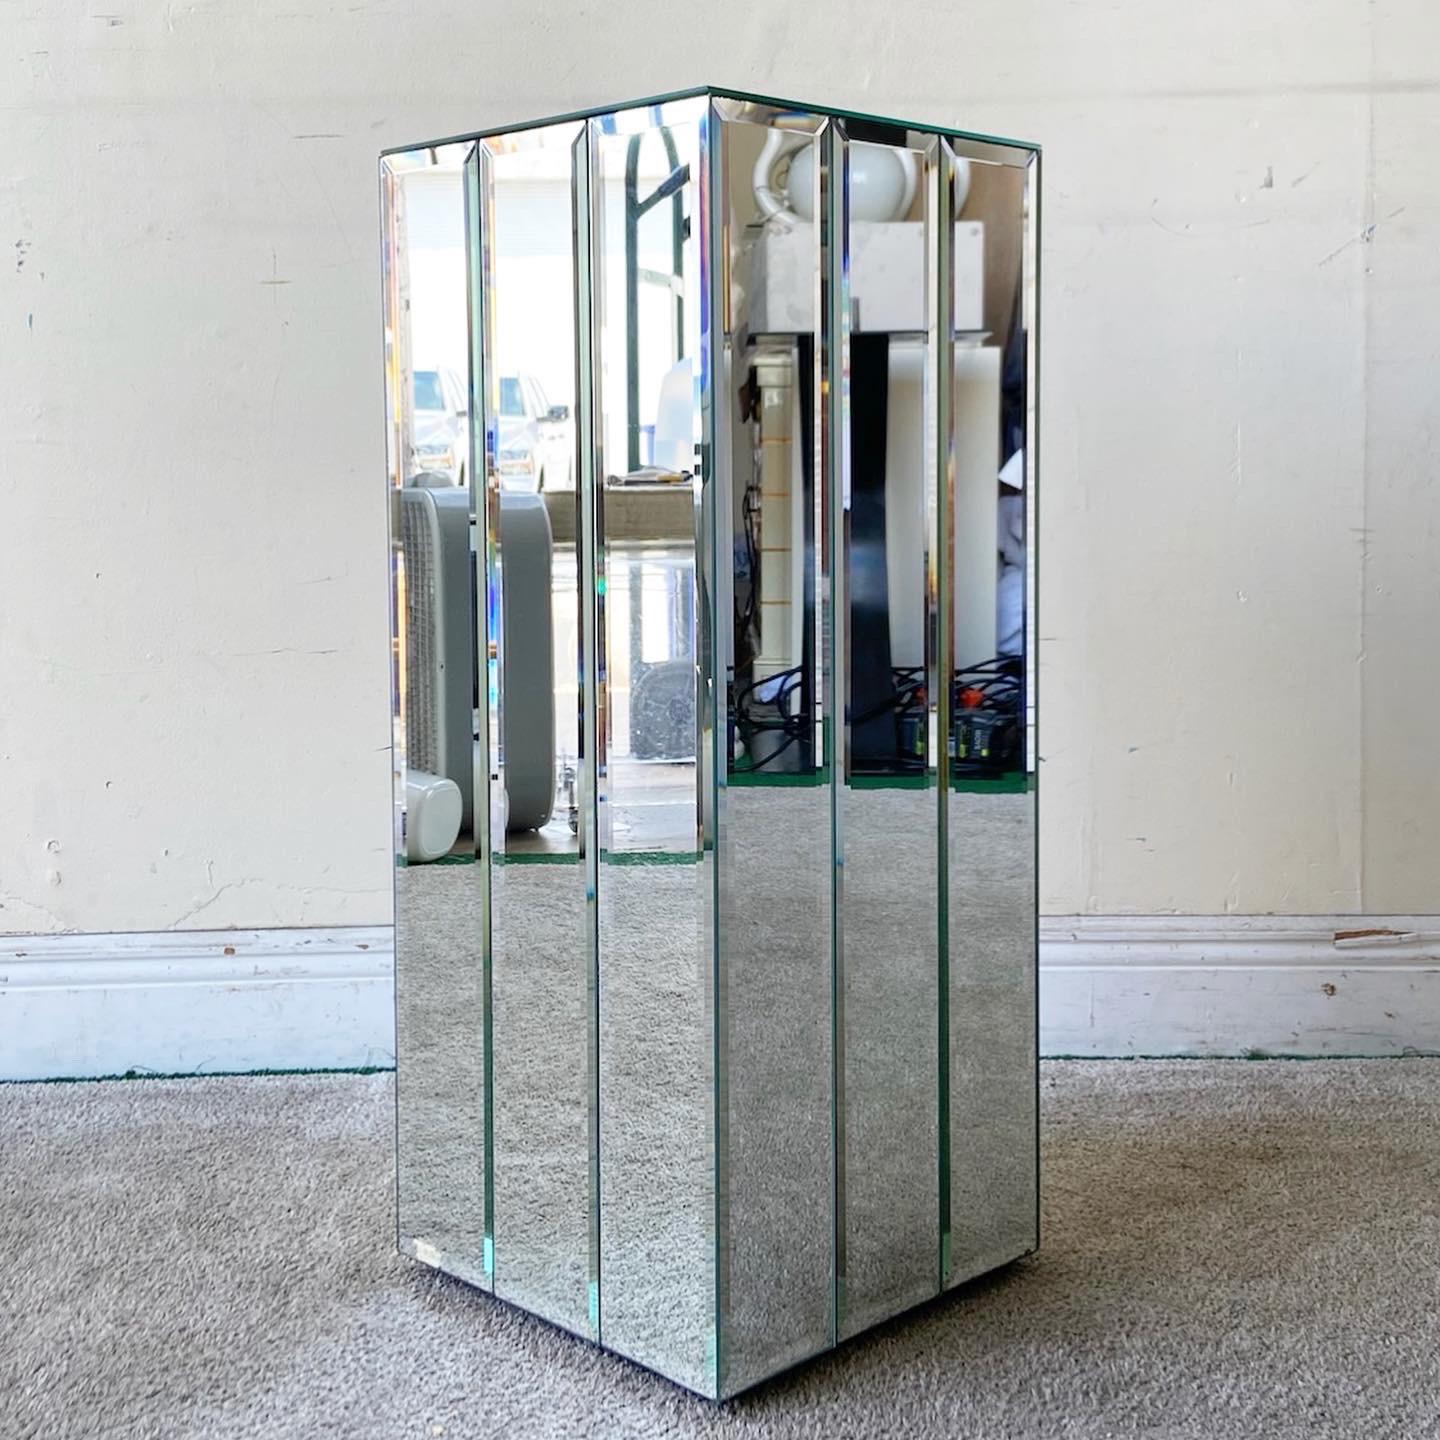 Excellent postmodern rectangle pedestal. Each side is split into 3 beveled mirrored panels.

Additional information:
Material: Mirror
Color: Transparent
Style: Postmodern
Time Period: 1980s
Place of origin: USA
Dimension: 12.25